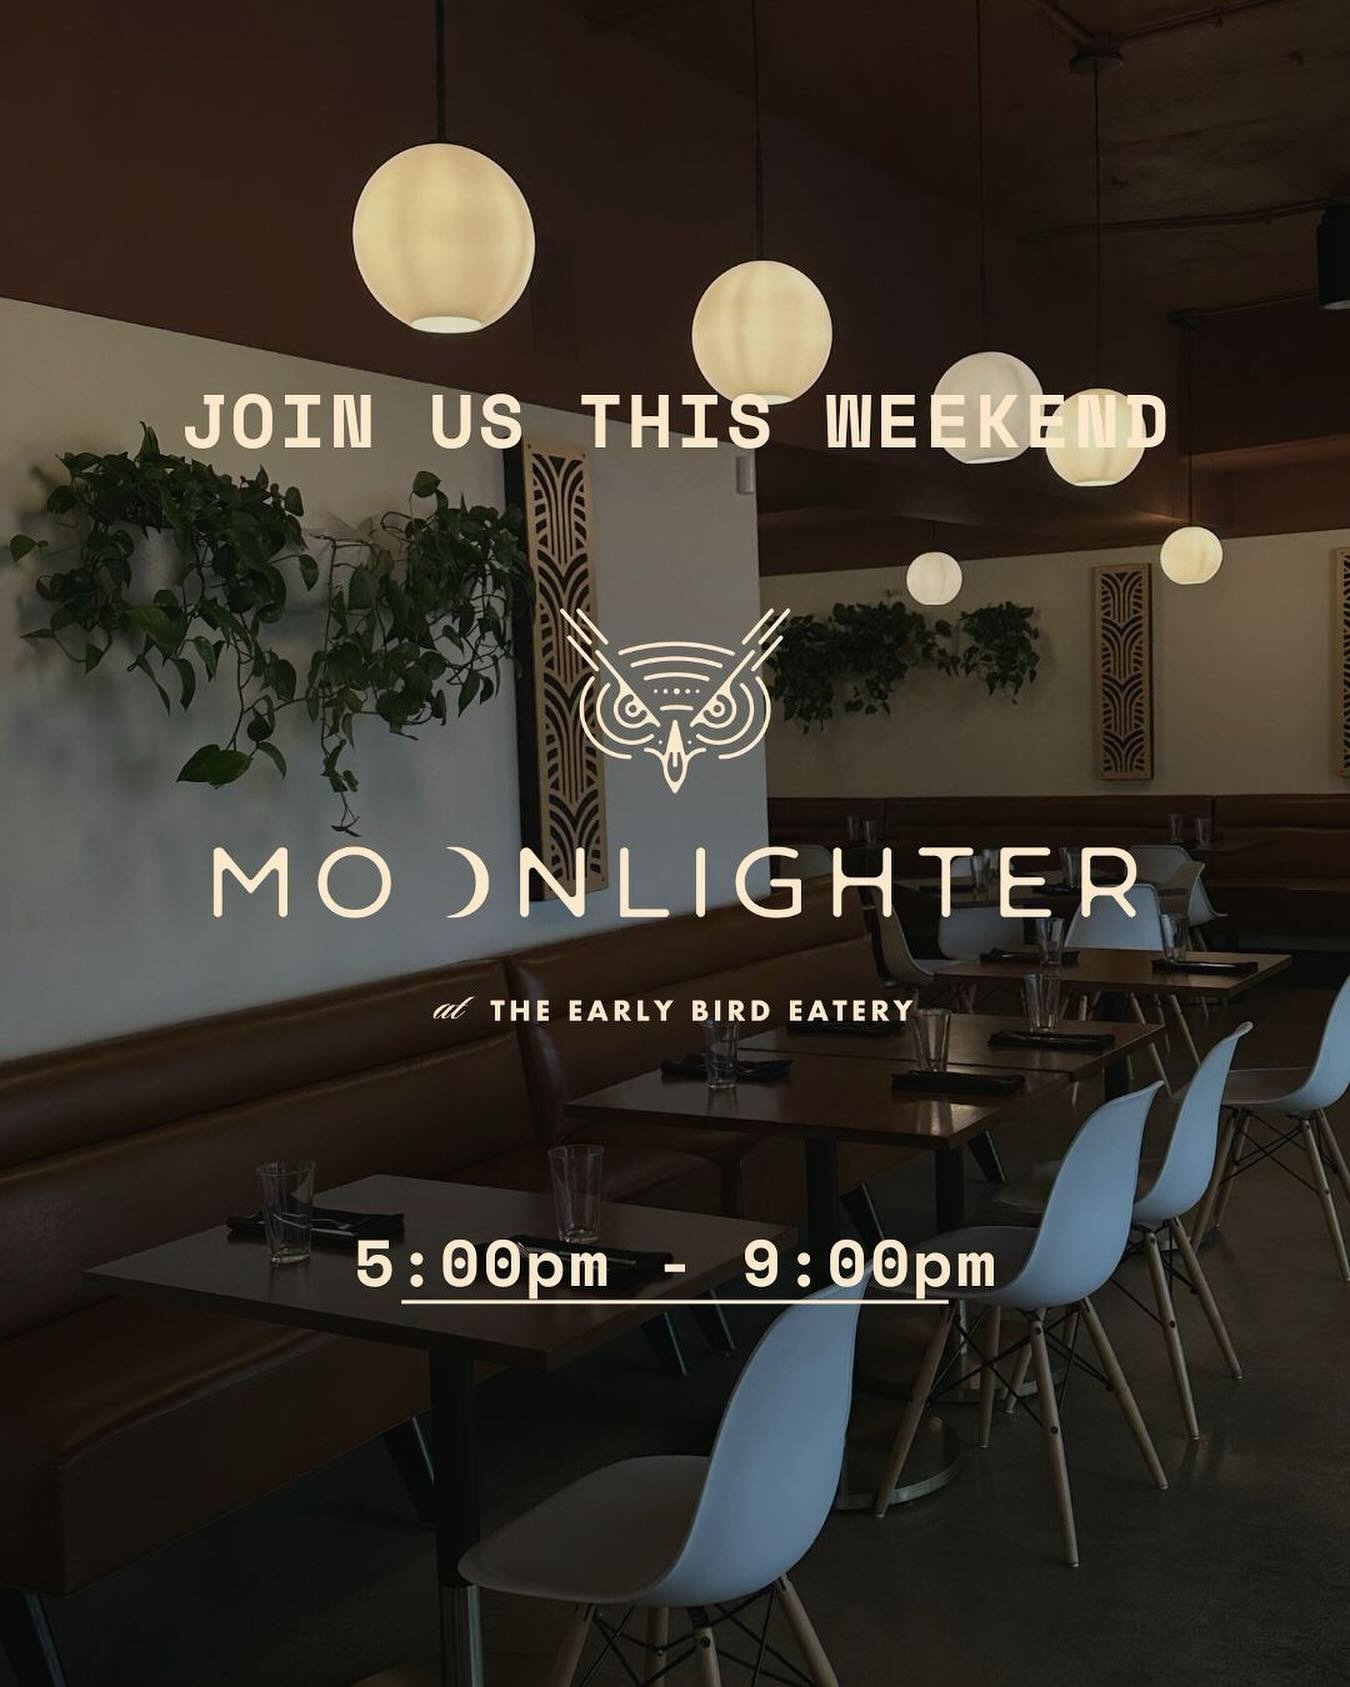 Make your reservation now! We will see you this weekend. 

#weekenddinnerspot #nightmoves #moonlighter #goodfood #greatdrinks #dtsouthbend